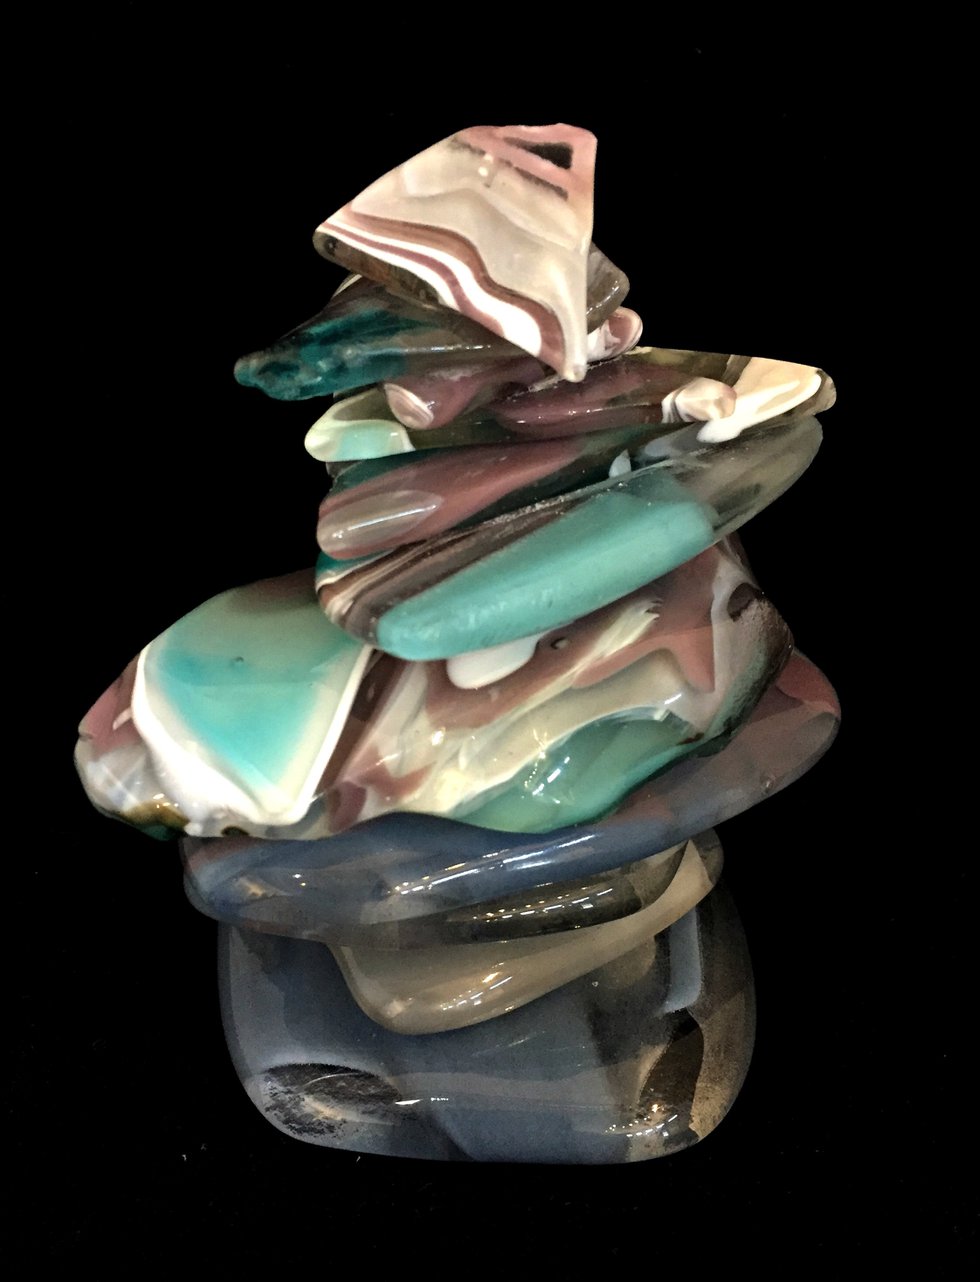 Heather Cuell, "Rocky Mountain Cairn," 2020